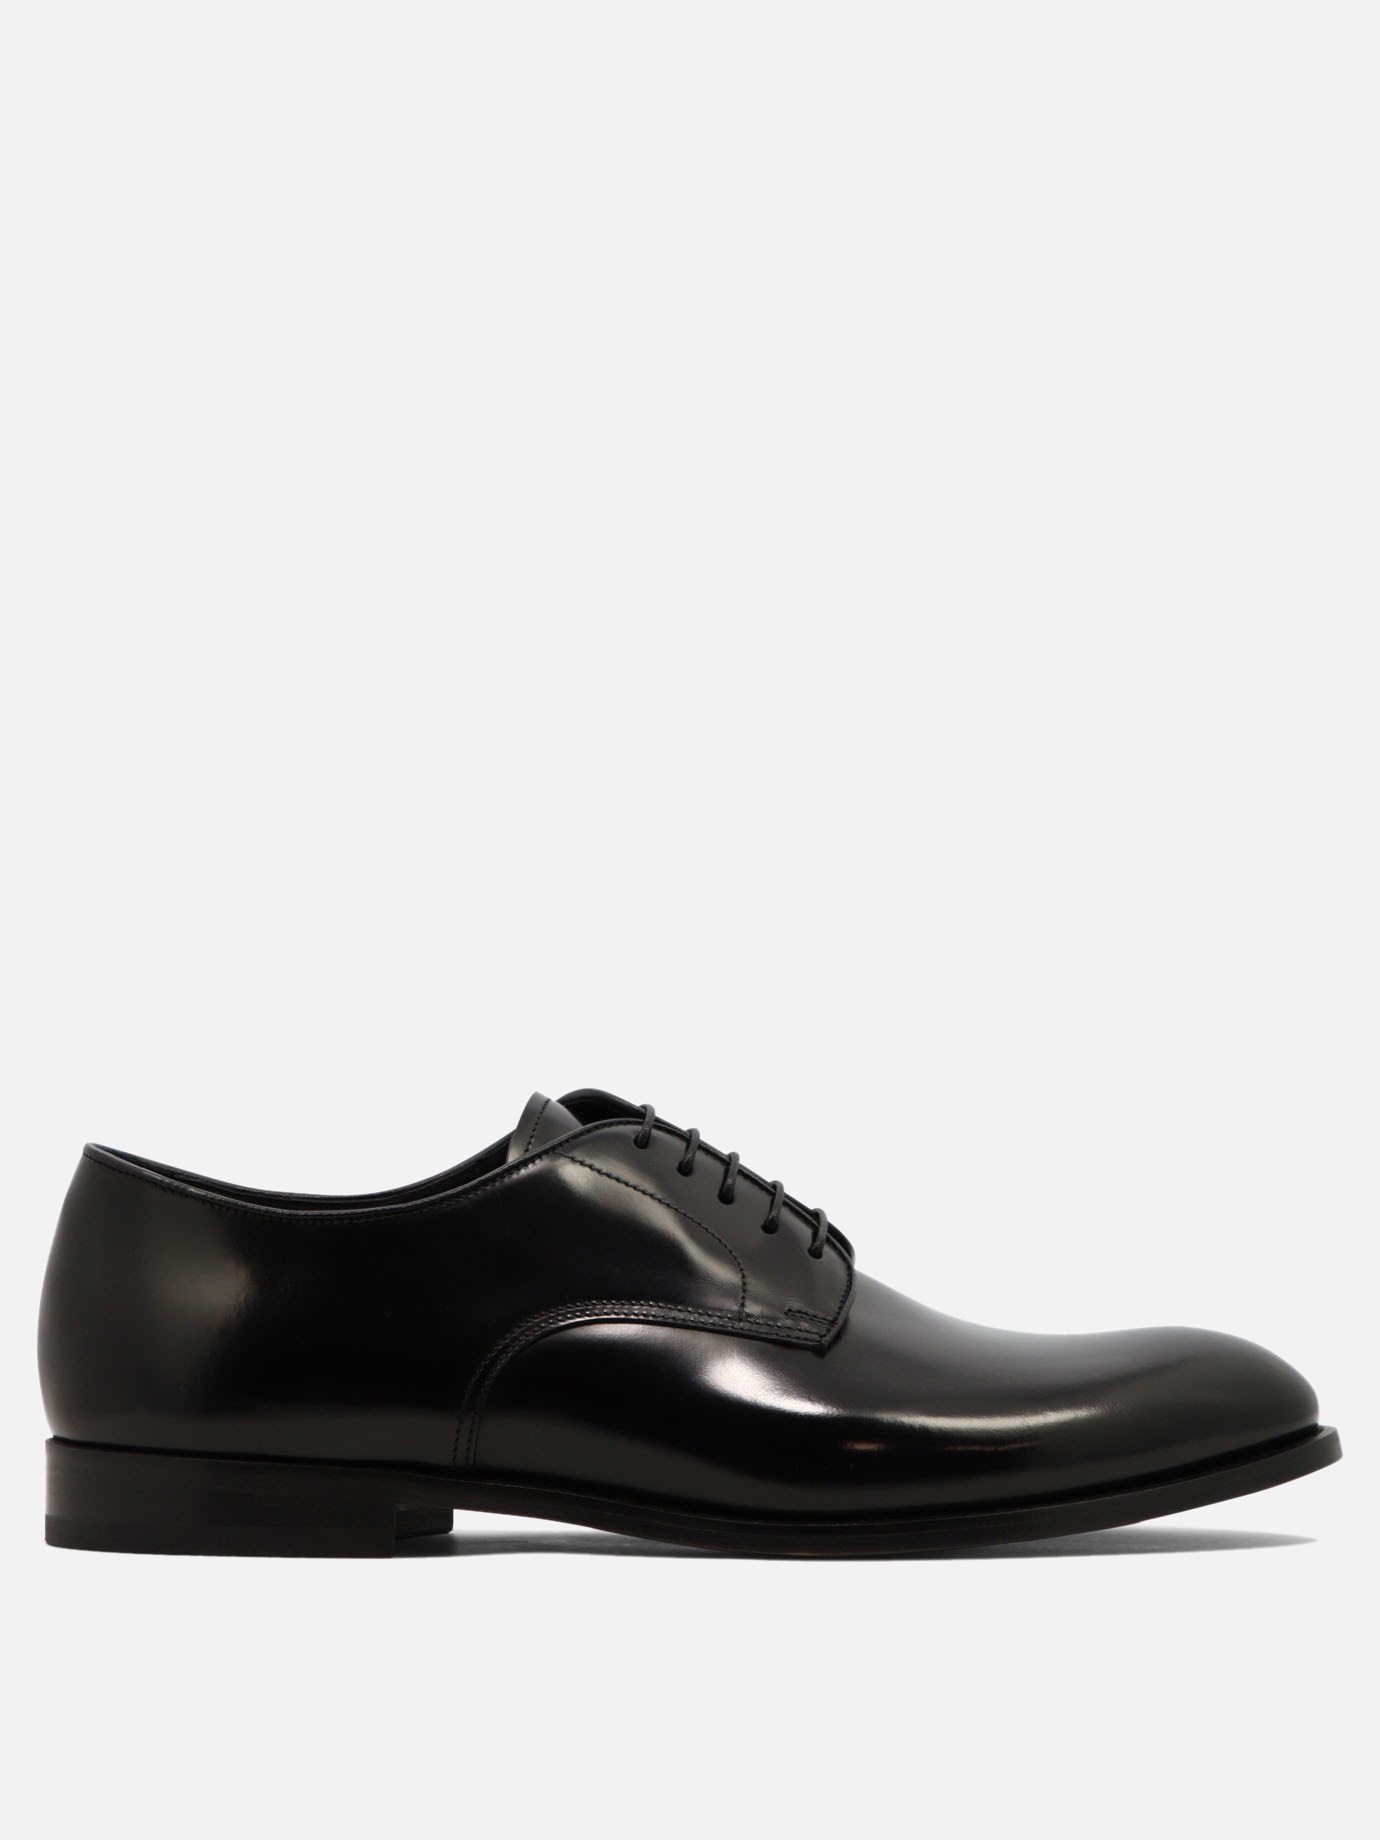  Derby  lace-up shoesby Doucal's - 0